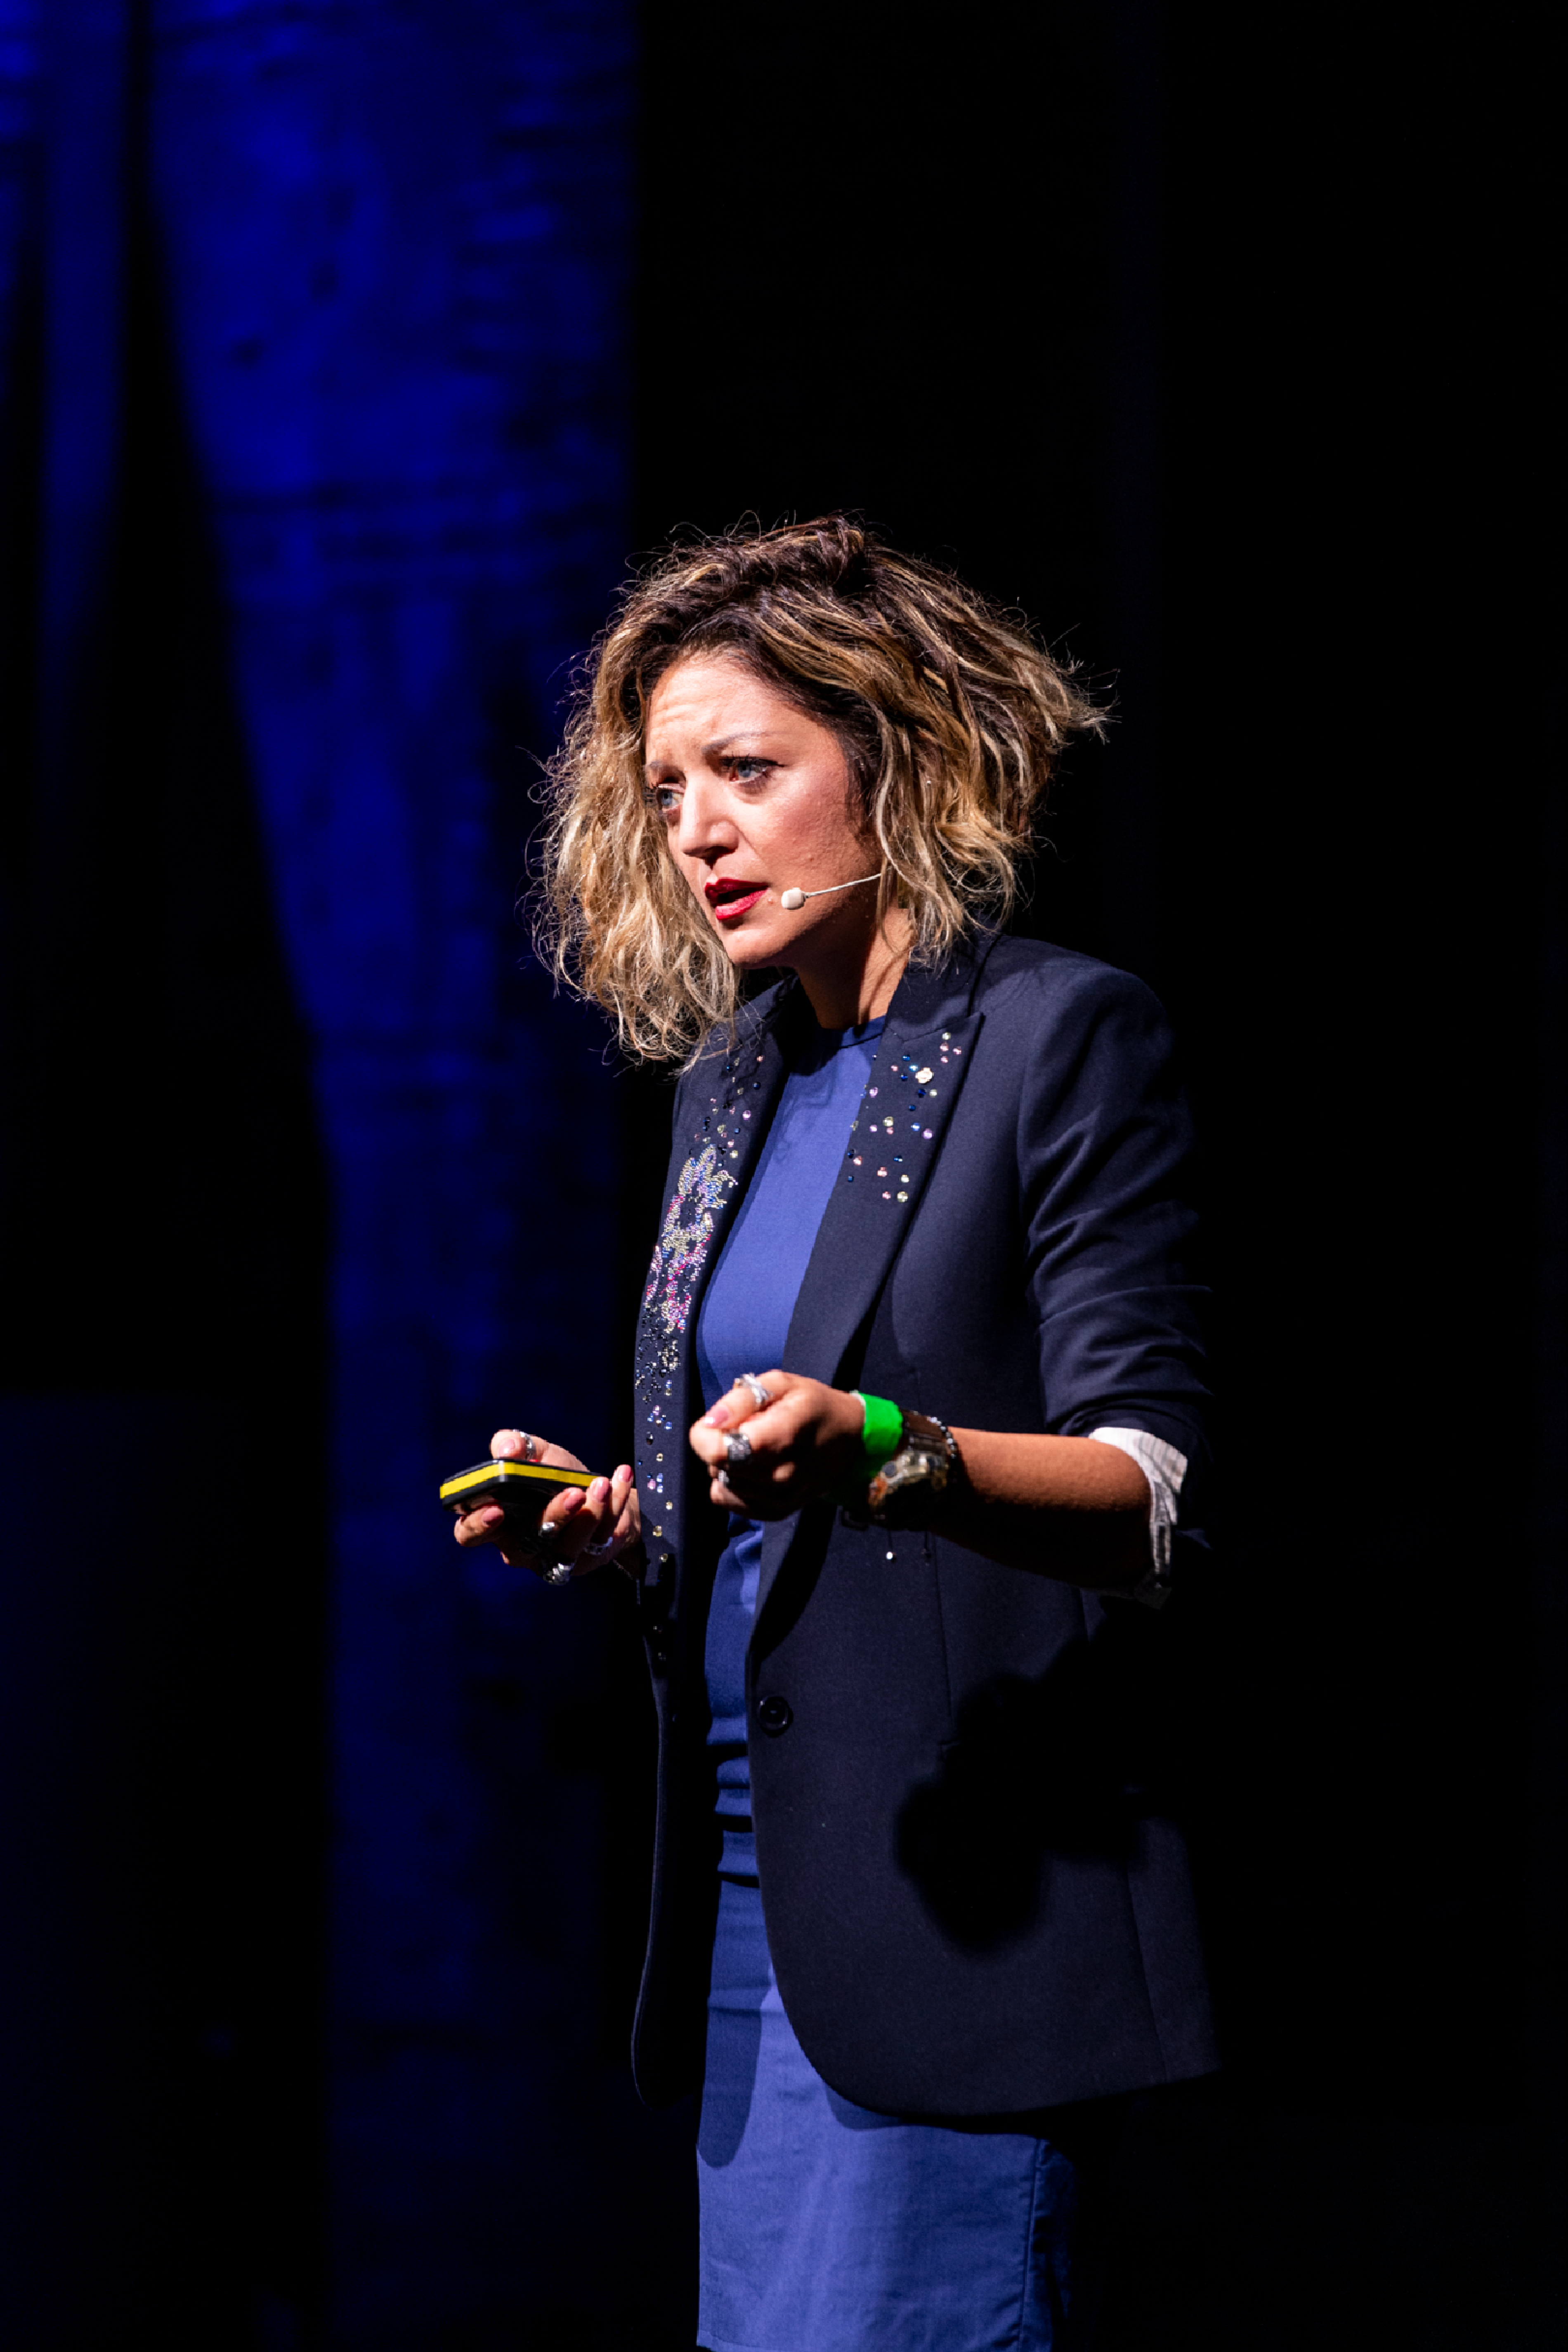 Vittoria Colizza speaks on stage at "Connections" in Torino.